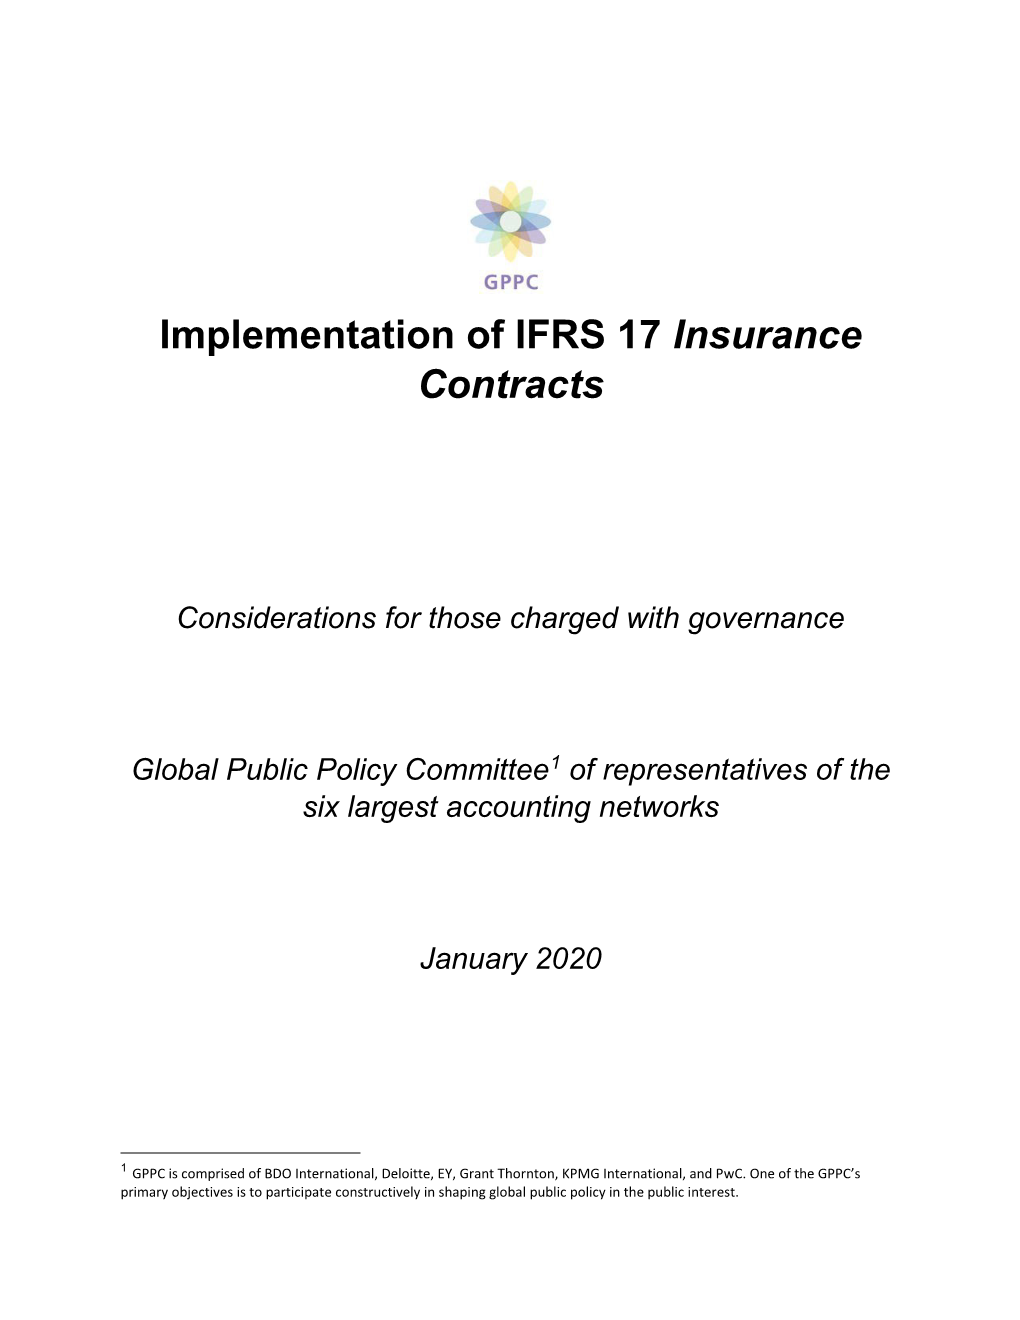 Implementation of IFRS 17 Insurance Contracts